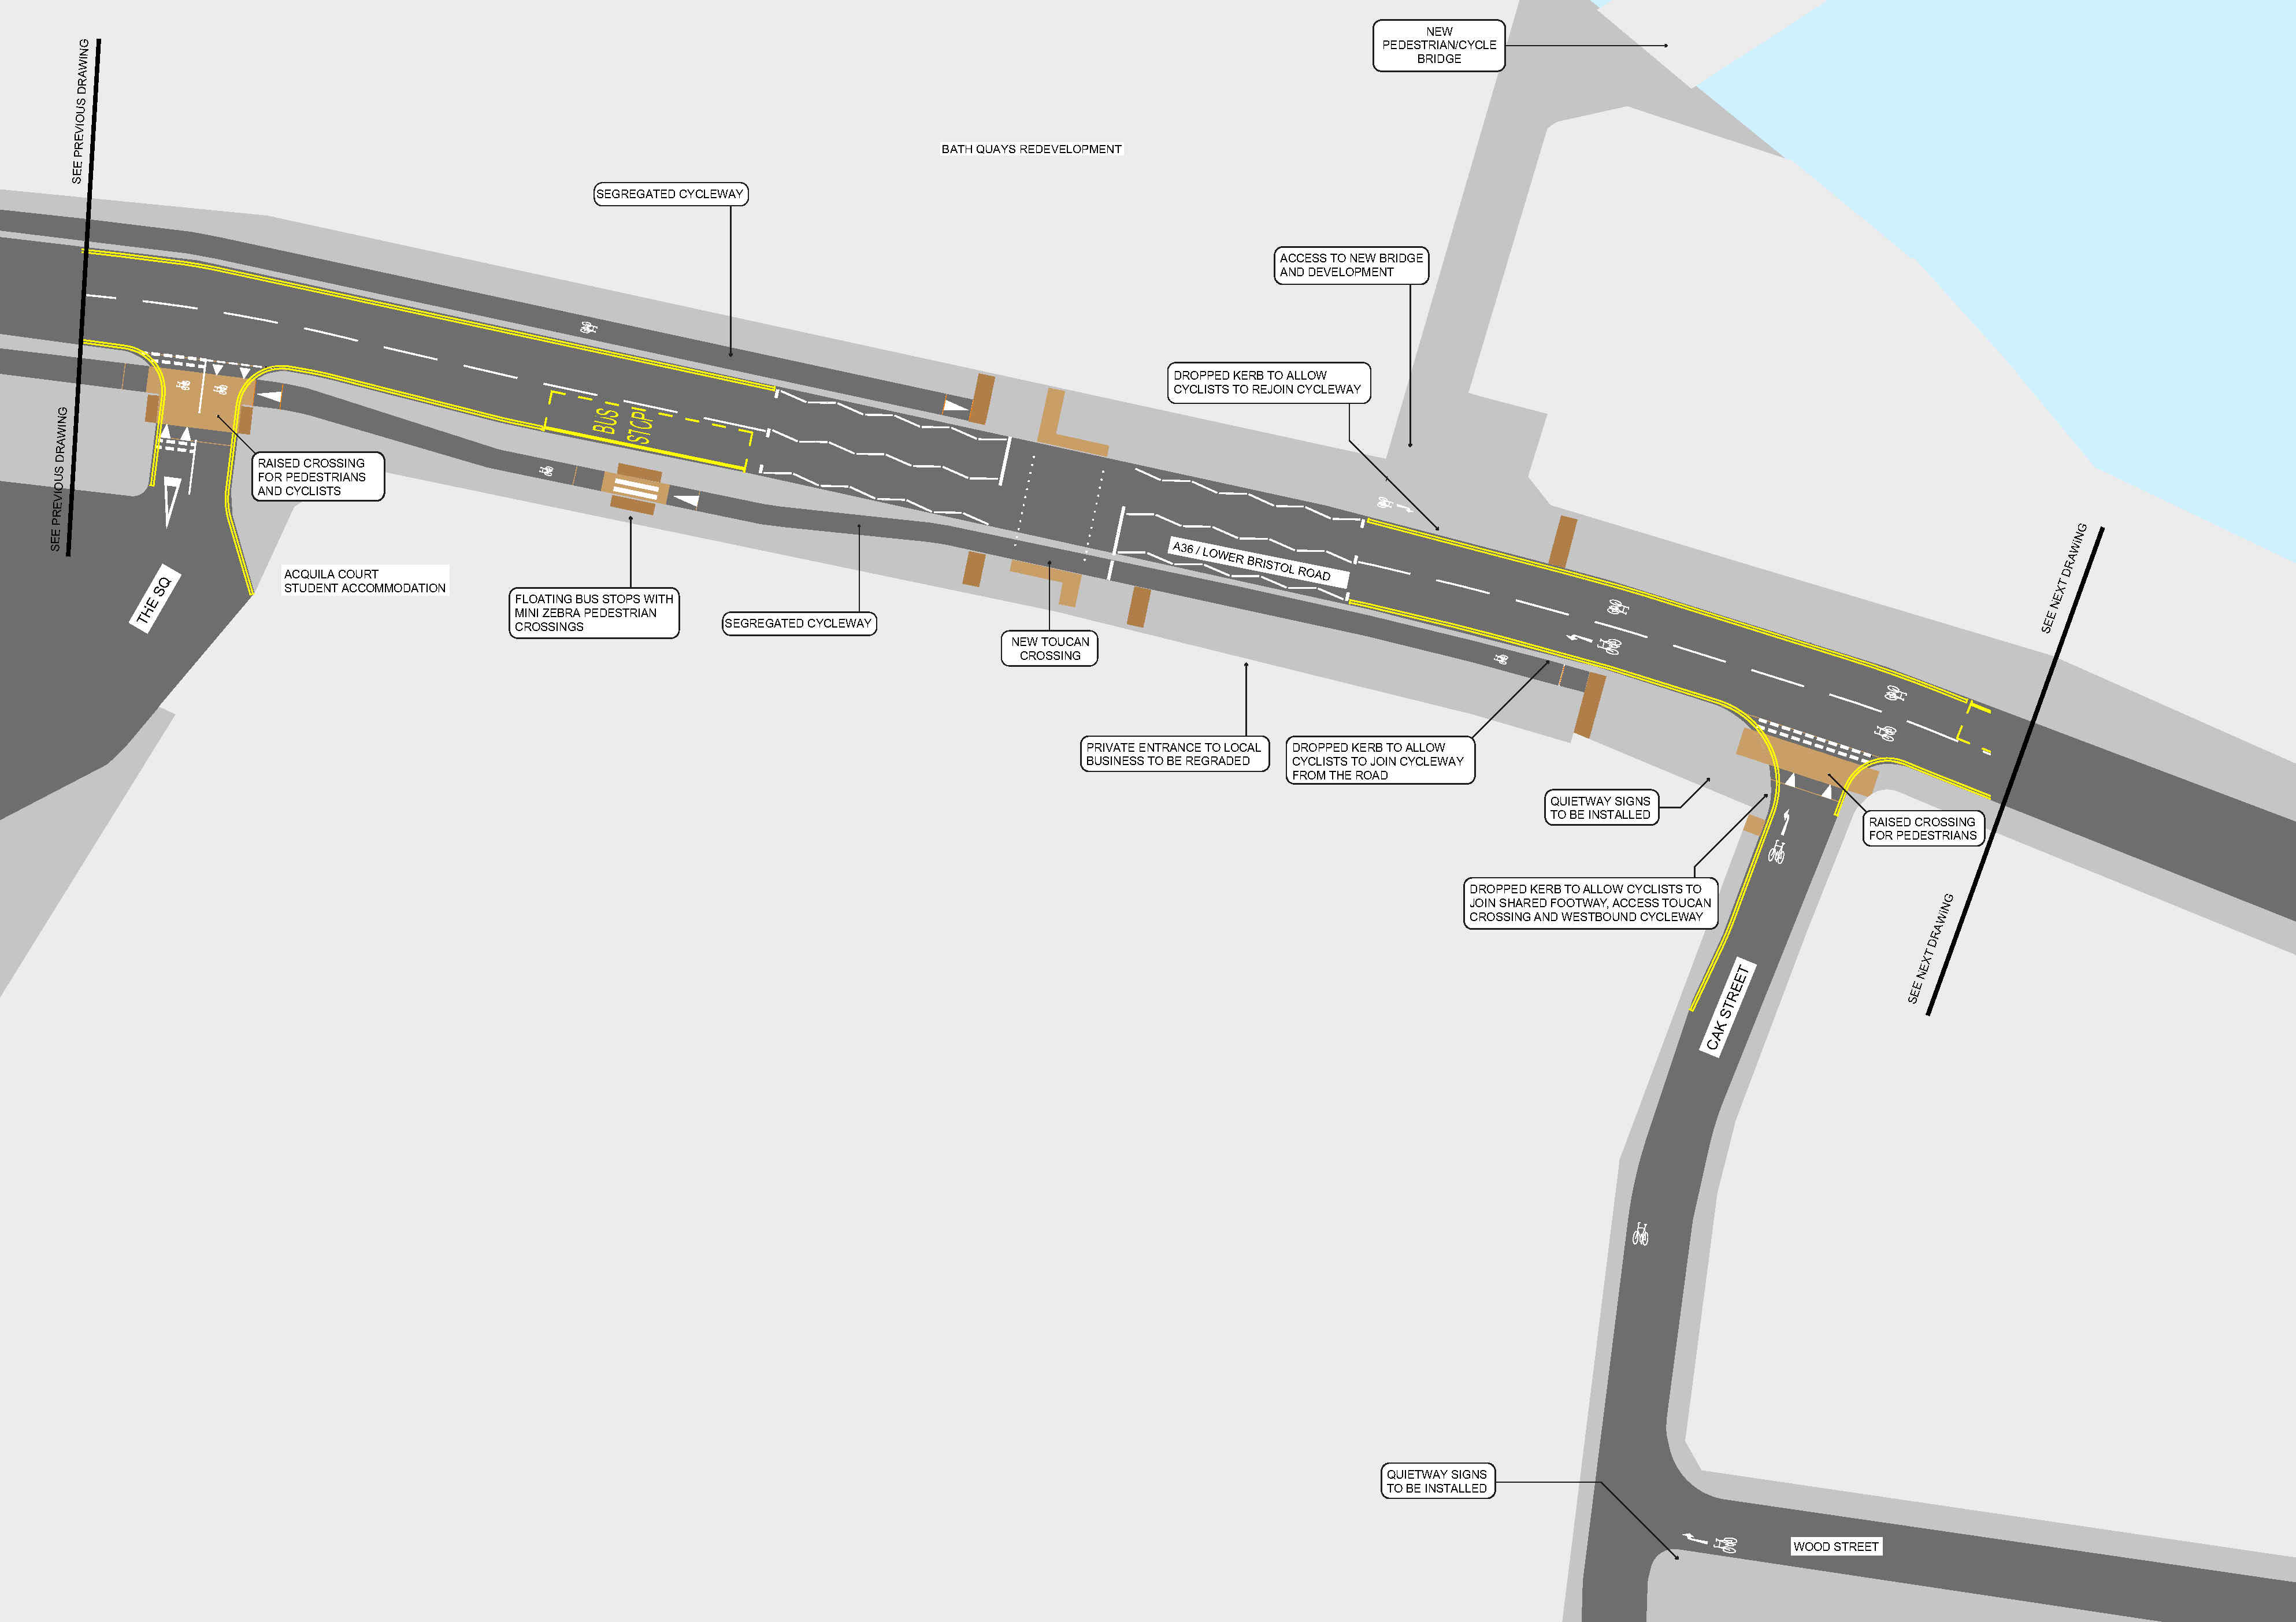 Map of section 2 of the proposed improvements to Lower Bristol Road as part of the Bath Quays Links project.